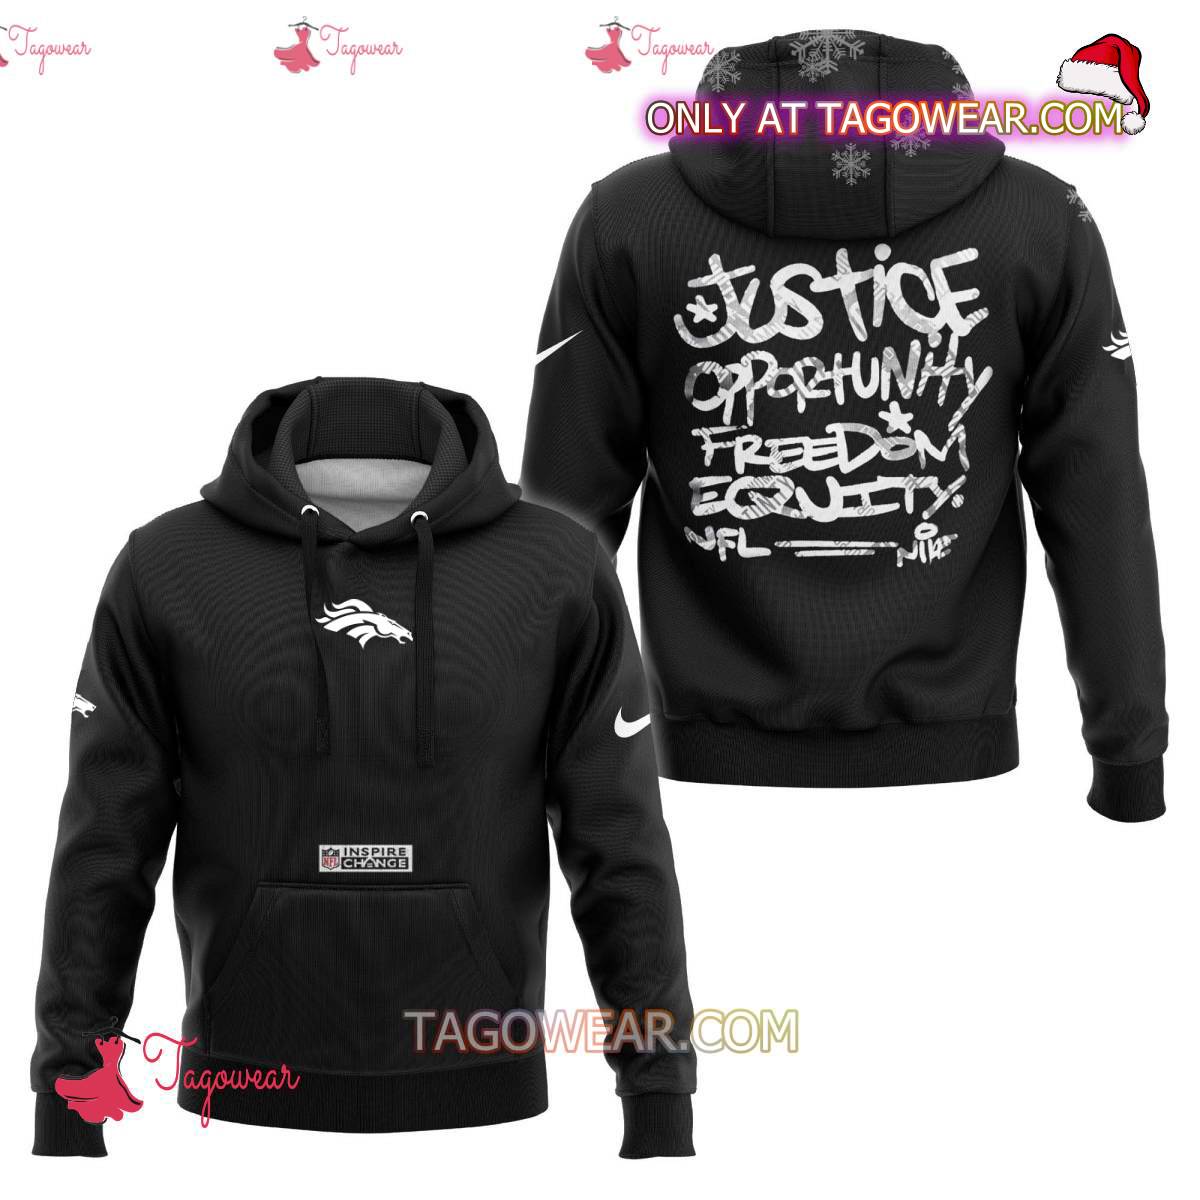 Denver Broncos NFL Inspire Change Justice Opportunity Equality Freedom Hoodie